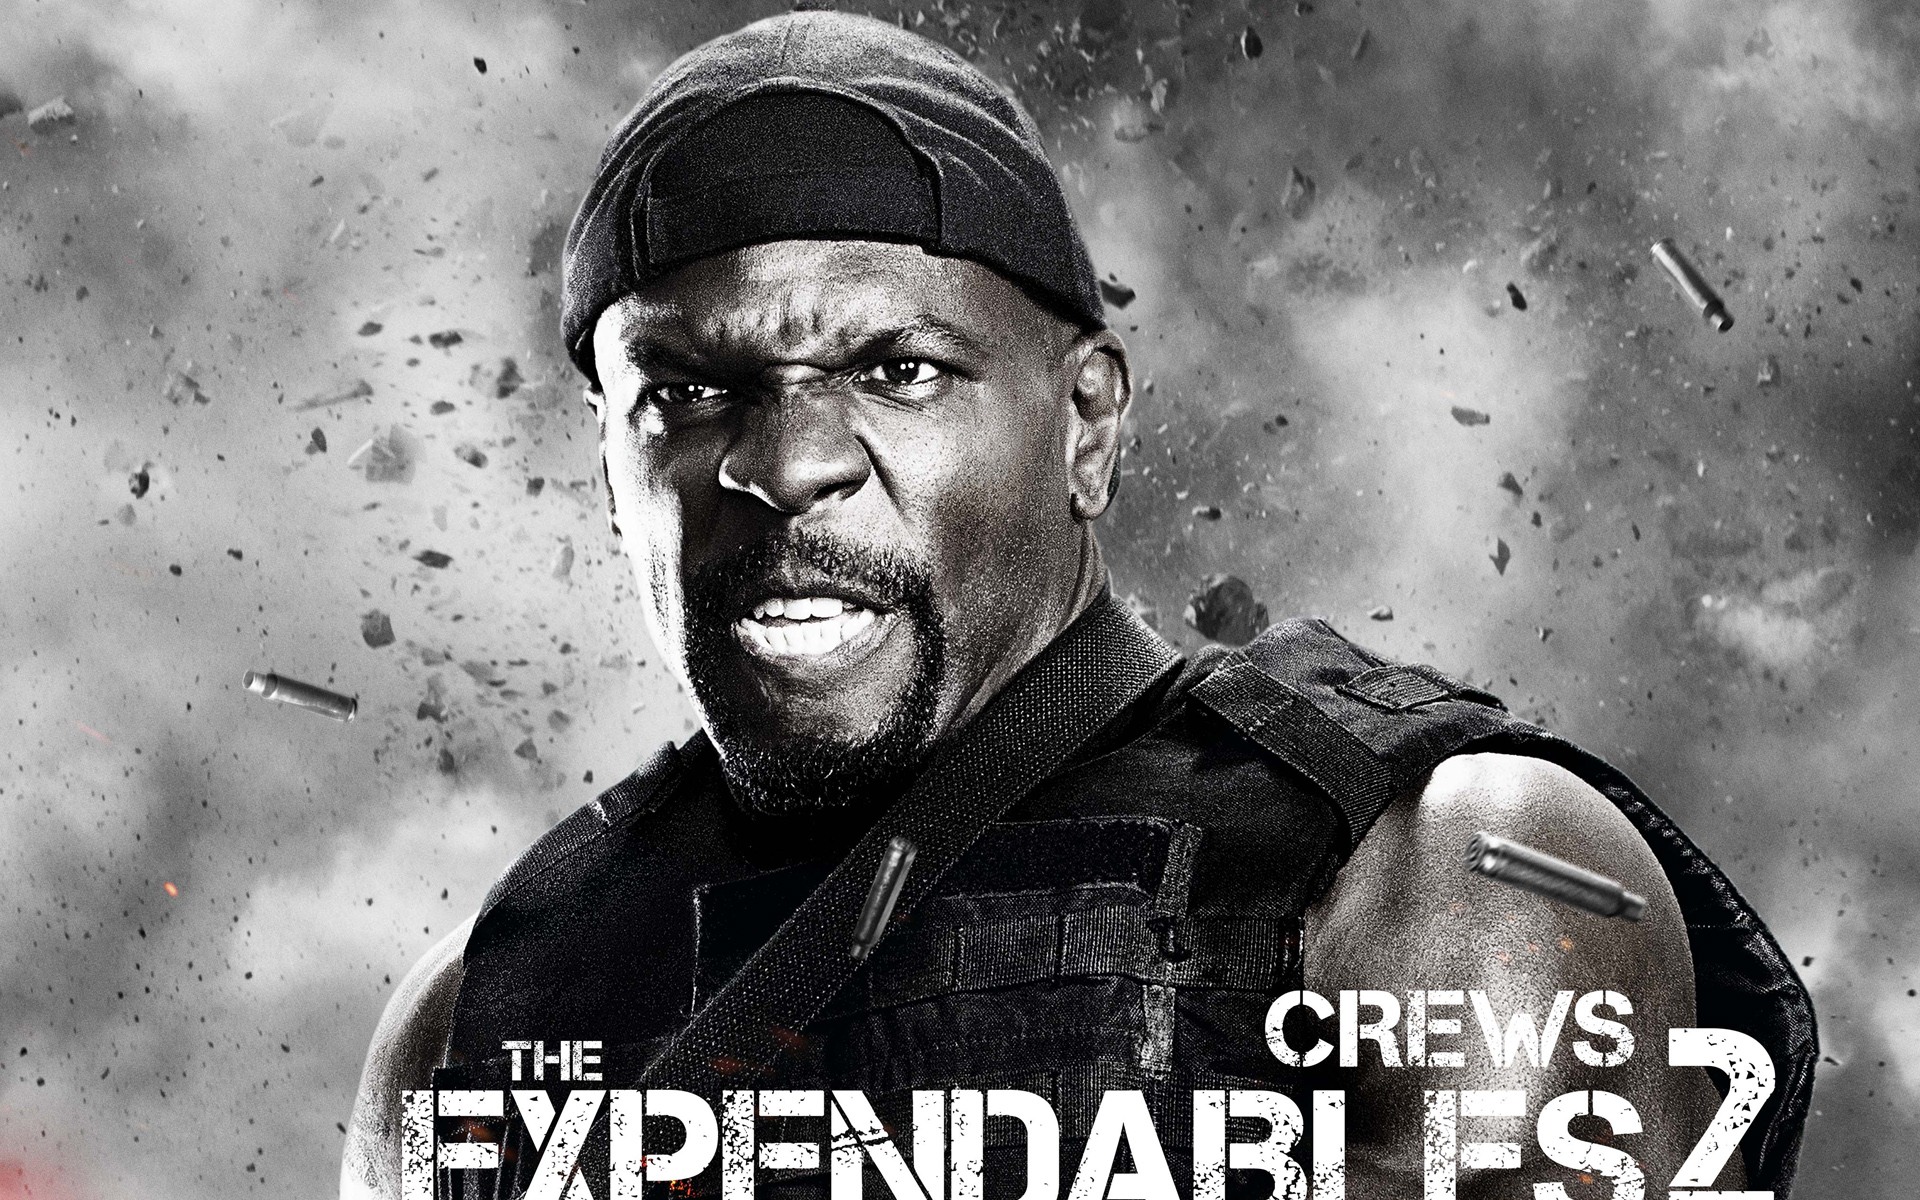 2012 Expendables2 HDの壁紙 #10 - 1920x1200